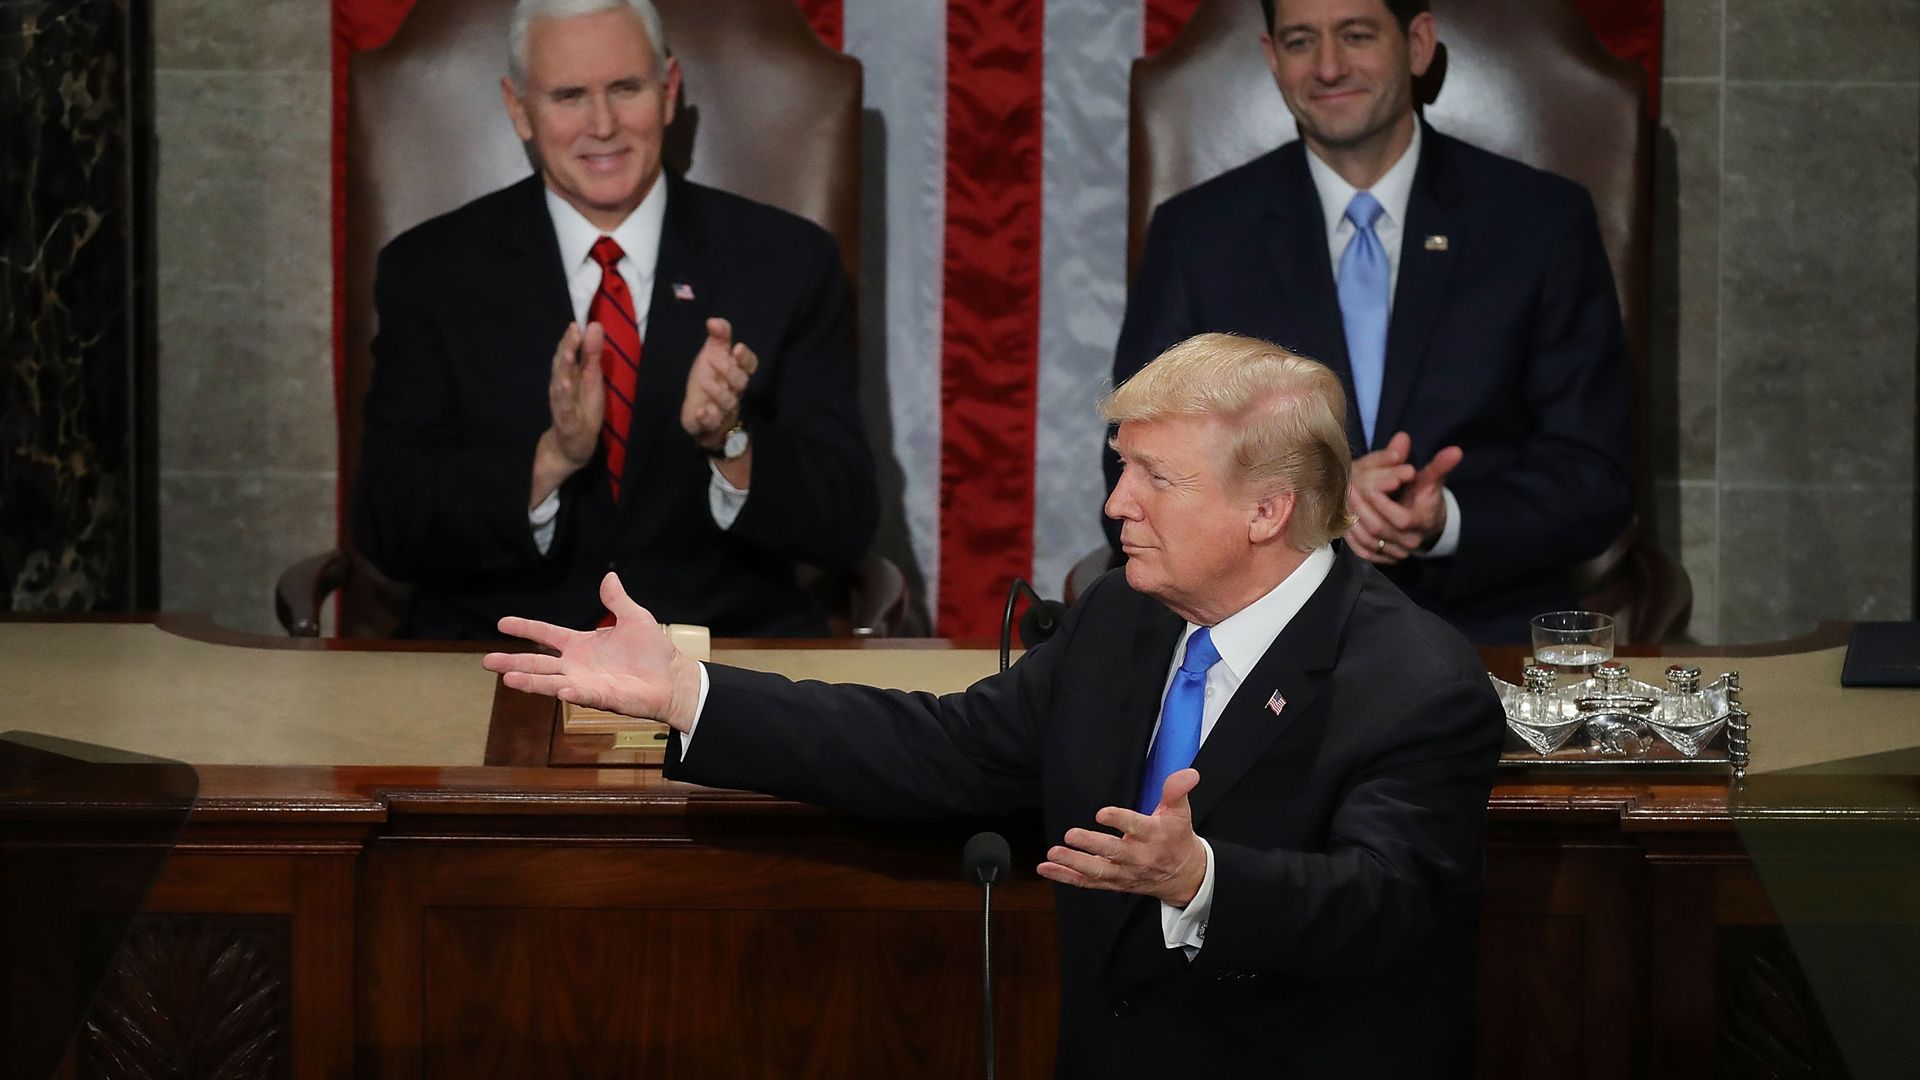 President Trump gives State of the Union address